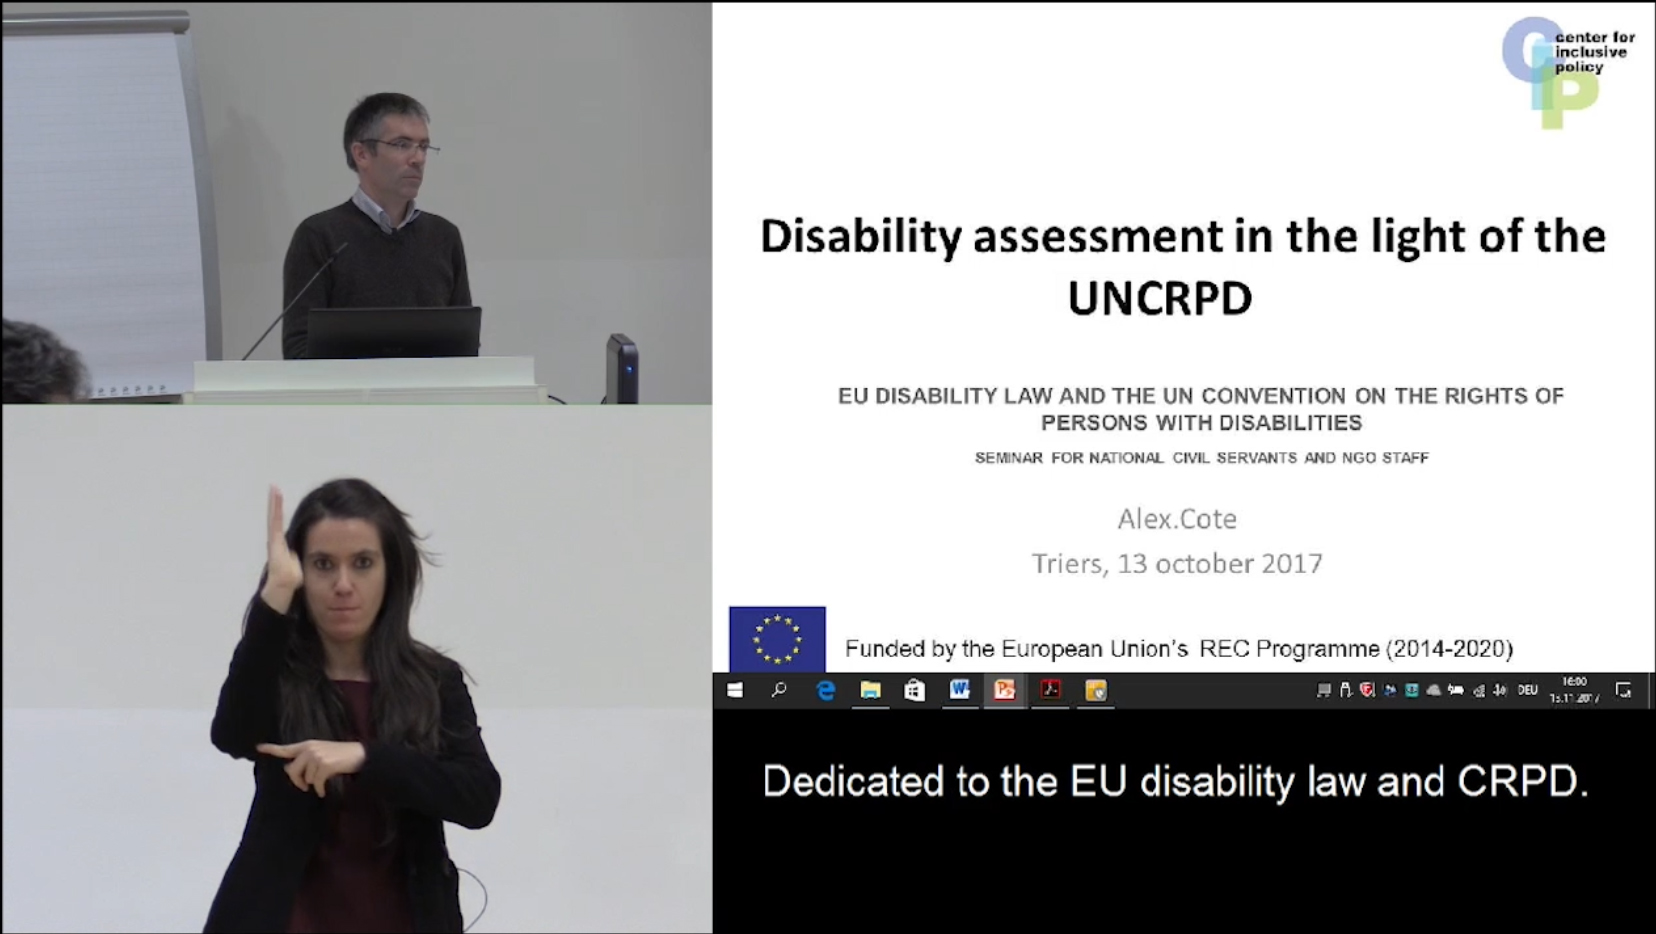 Foto: Alexandre Cote: Disability assessment in the light of the UNCRPD